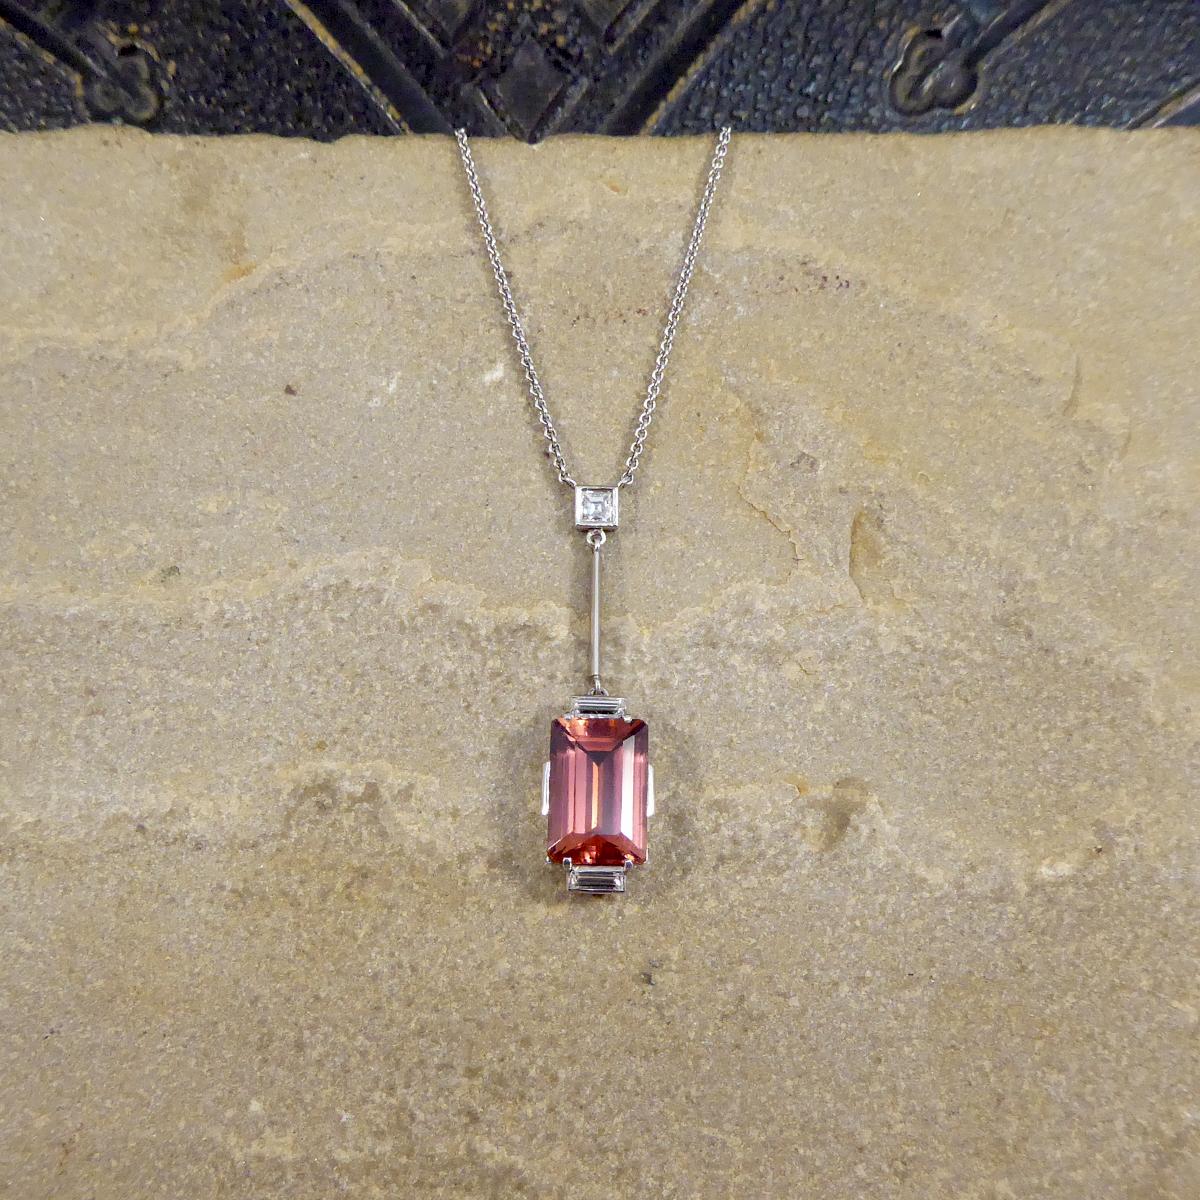 This lovely contemporary necklace has been hand crafted in an Art Deco style. The necklace features a Emerald Cut Red Tourmaline with Baguette Cut Diamonds on the top and bottom of the gemstone, this hangs on a straight bar with a Diamond Bail to